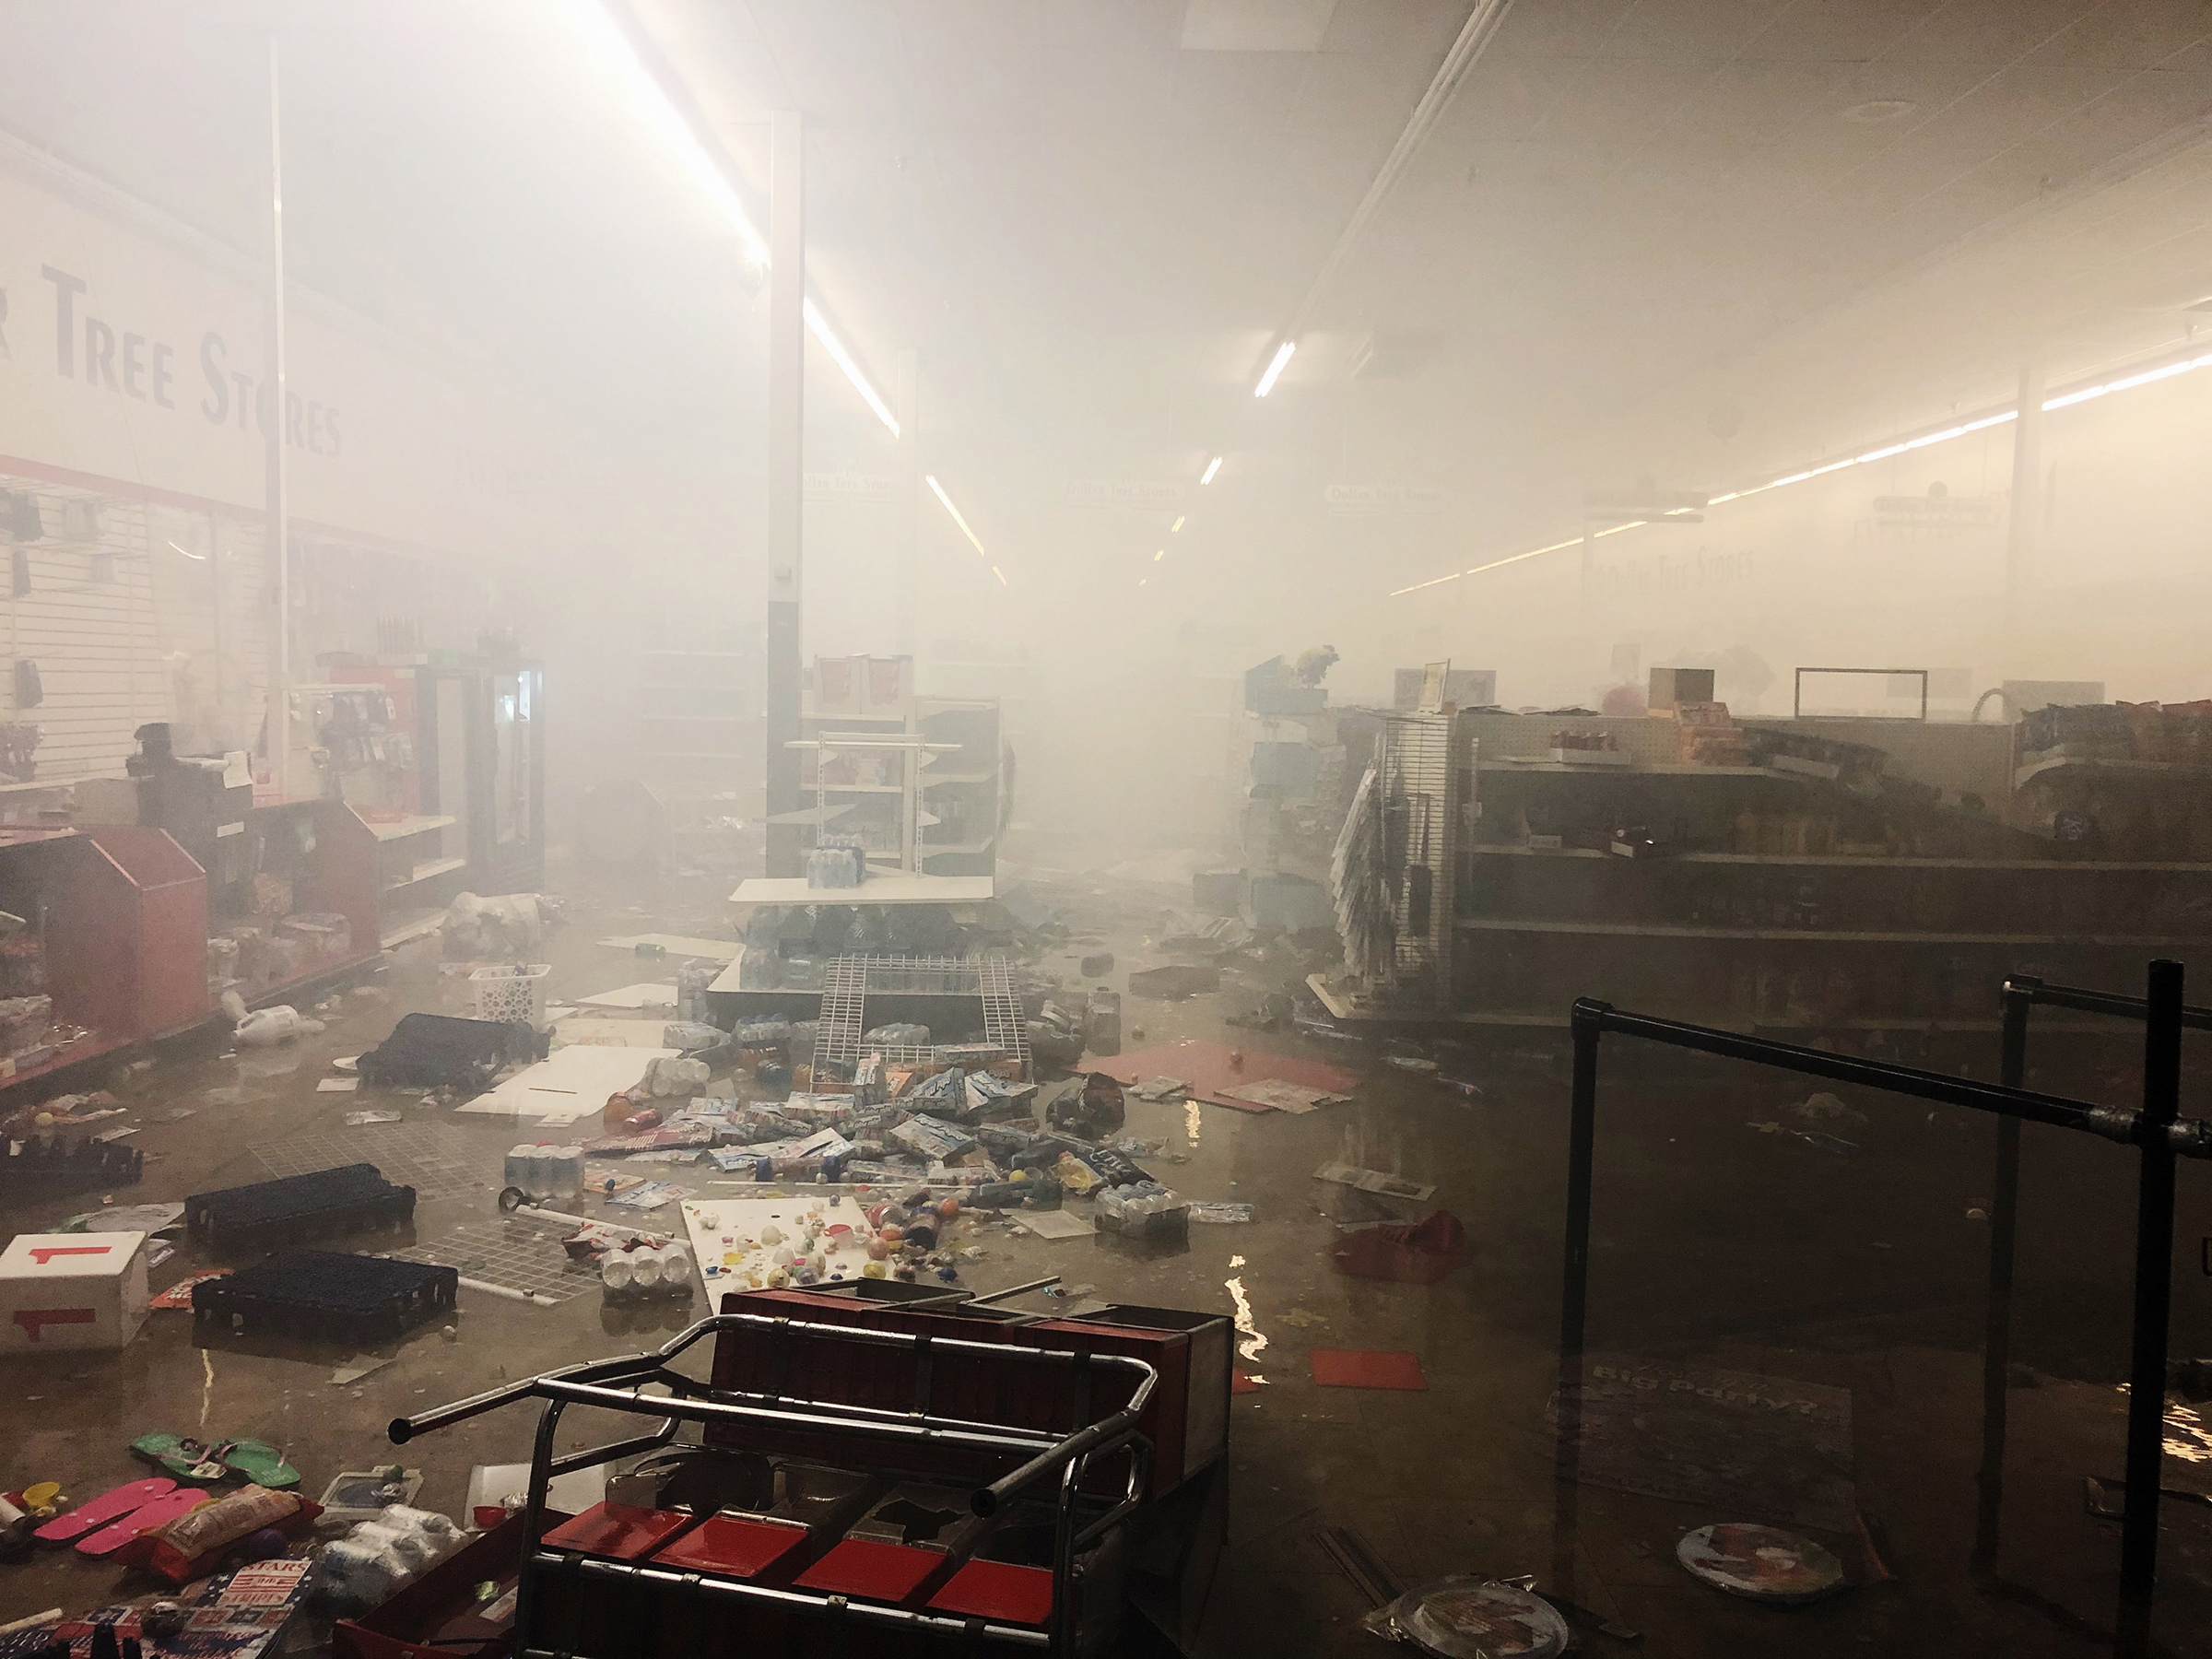 The remains of a Dollar Tree store smolders after protests in Minneapolis on May 28, 2020.